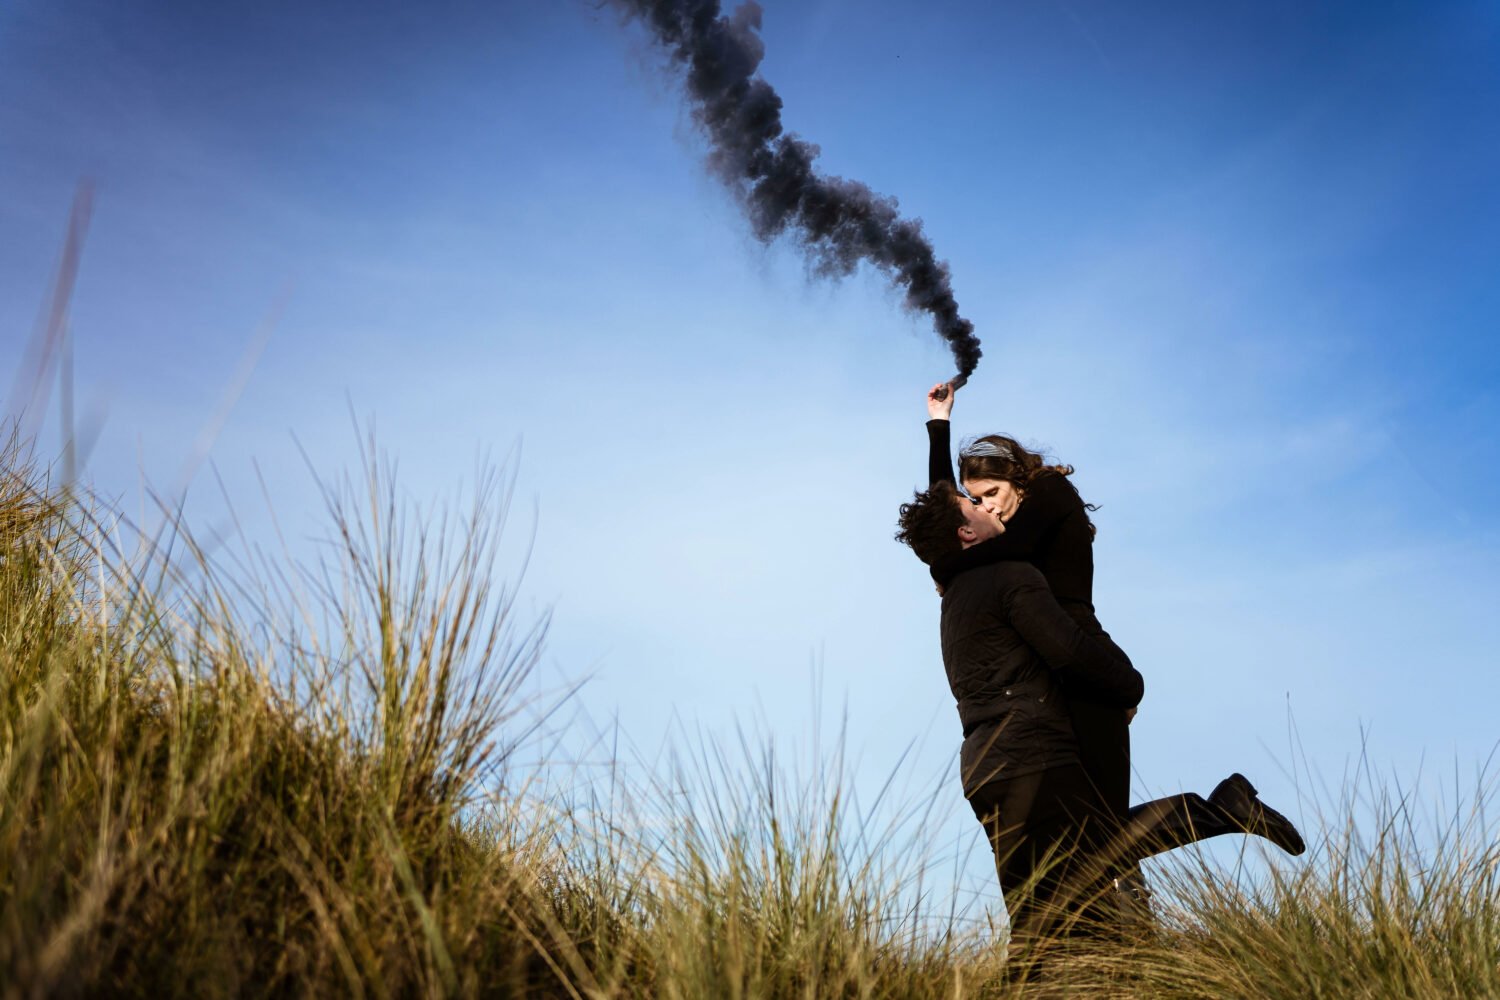 A couple kiss in the dunes at a norfolk beach as the lady holds a black smoke bomb in the air